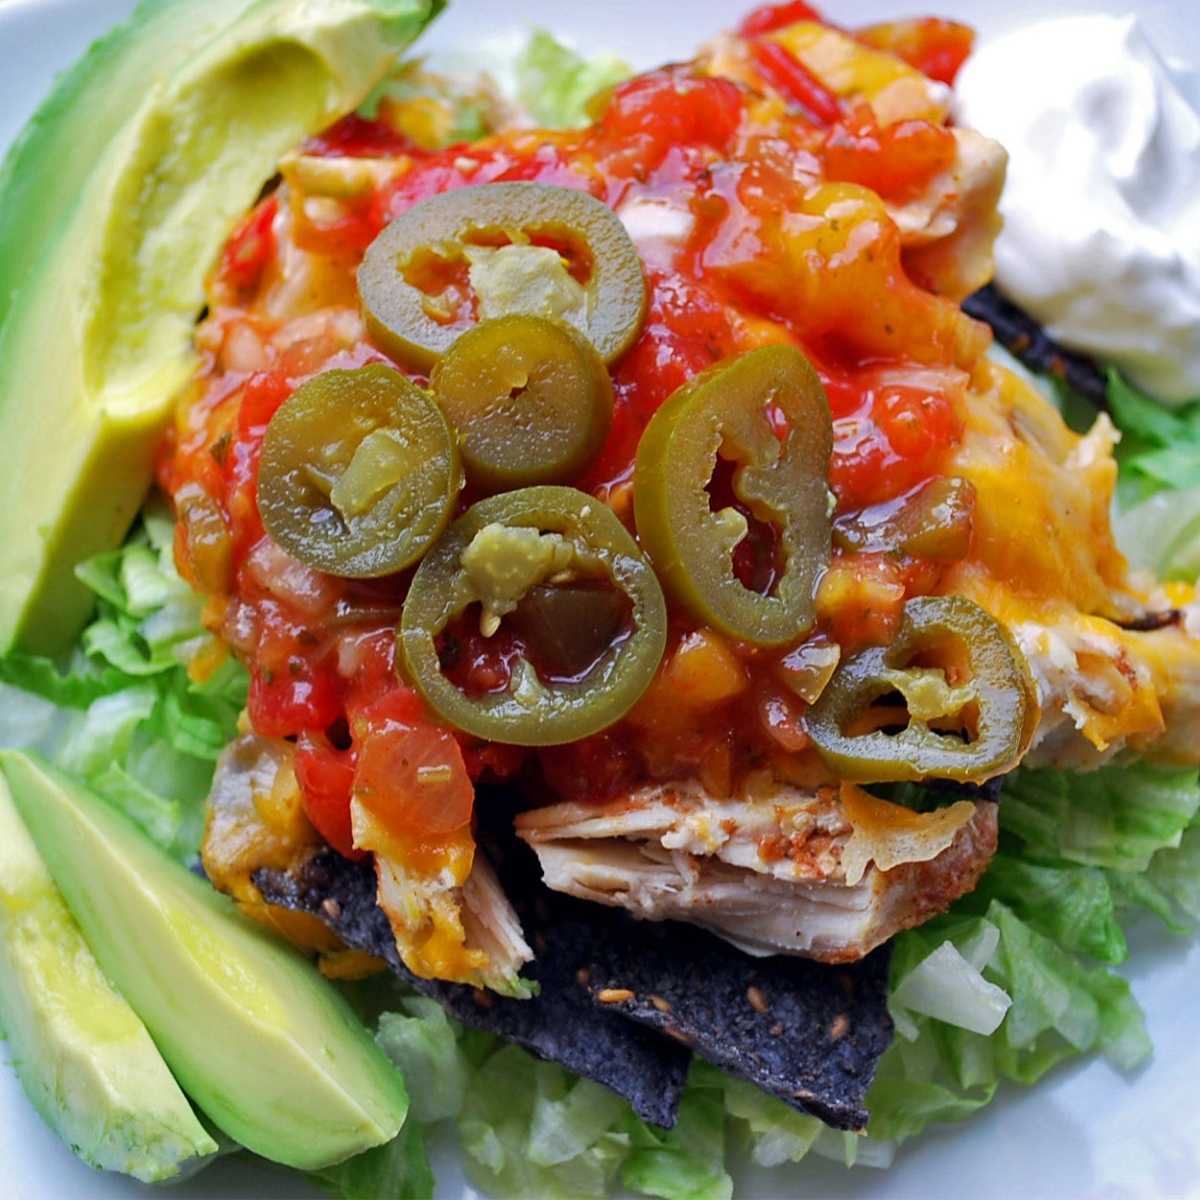 Oven-Baked Loaded Chicken Nachos recipe- Amee's Savory Dish